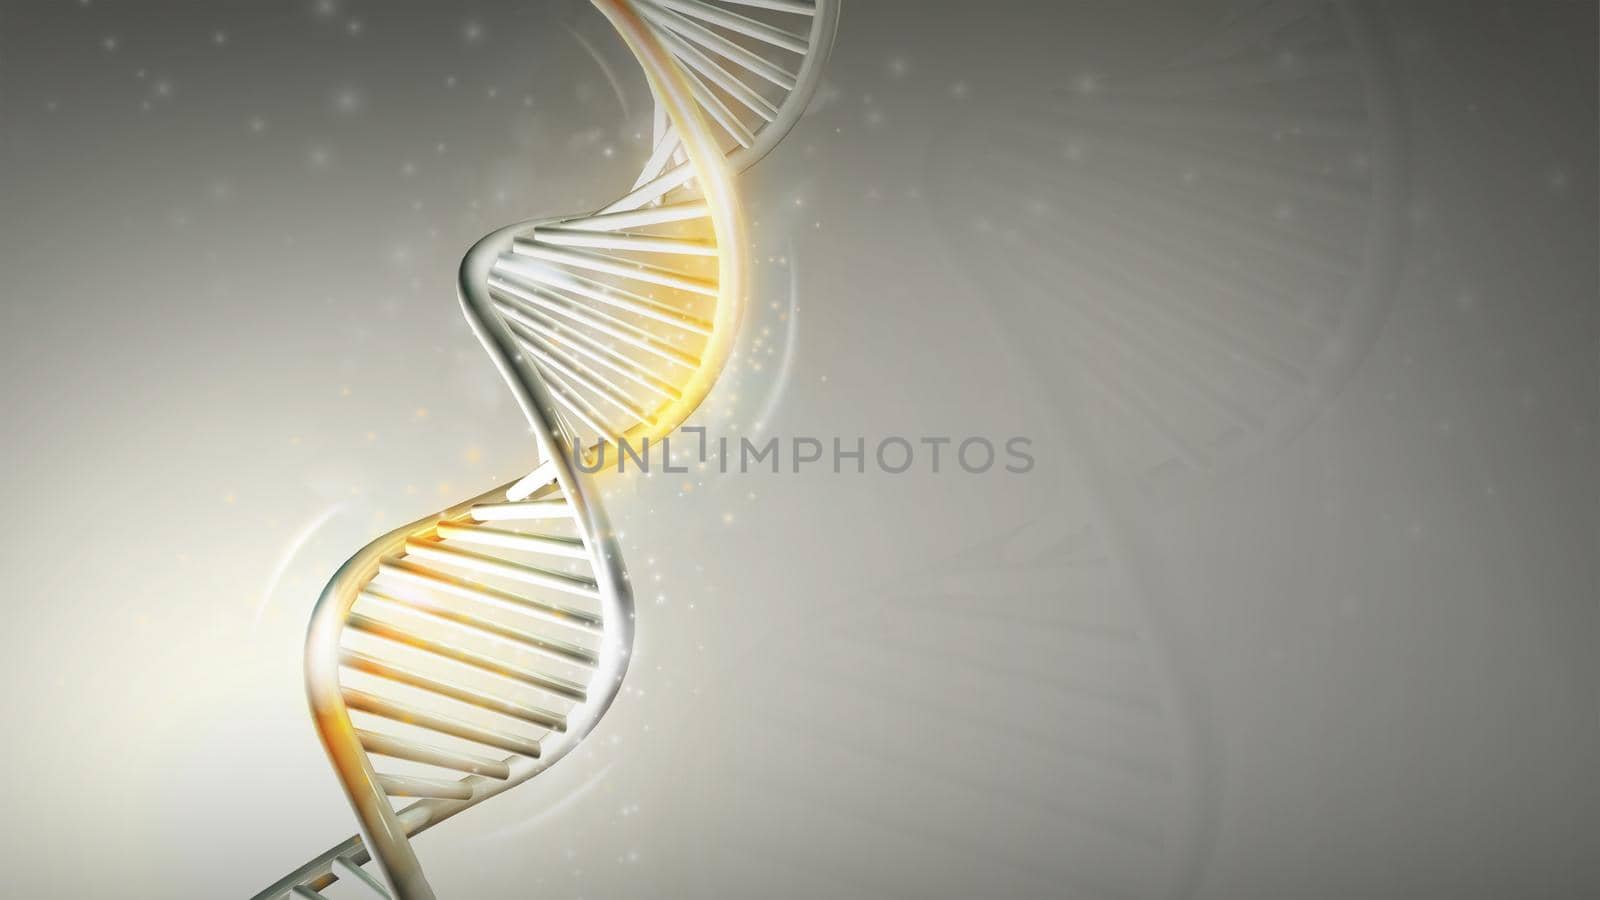 Computer model of DNA double helix with golden glow on a light gray background. 3D render.